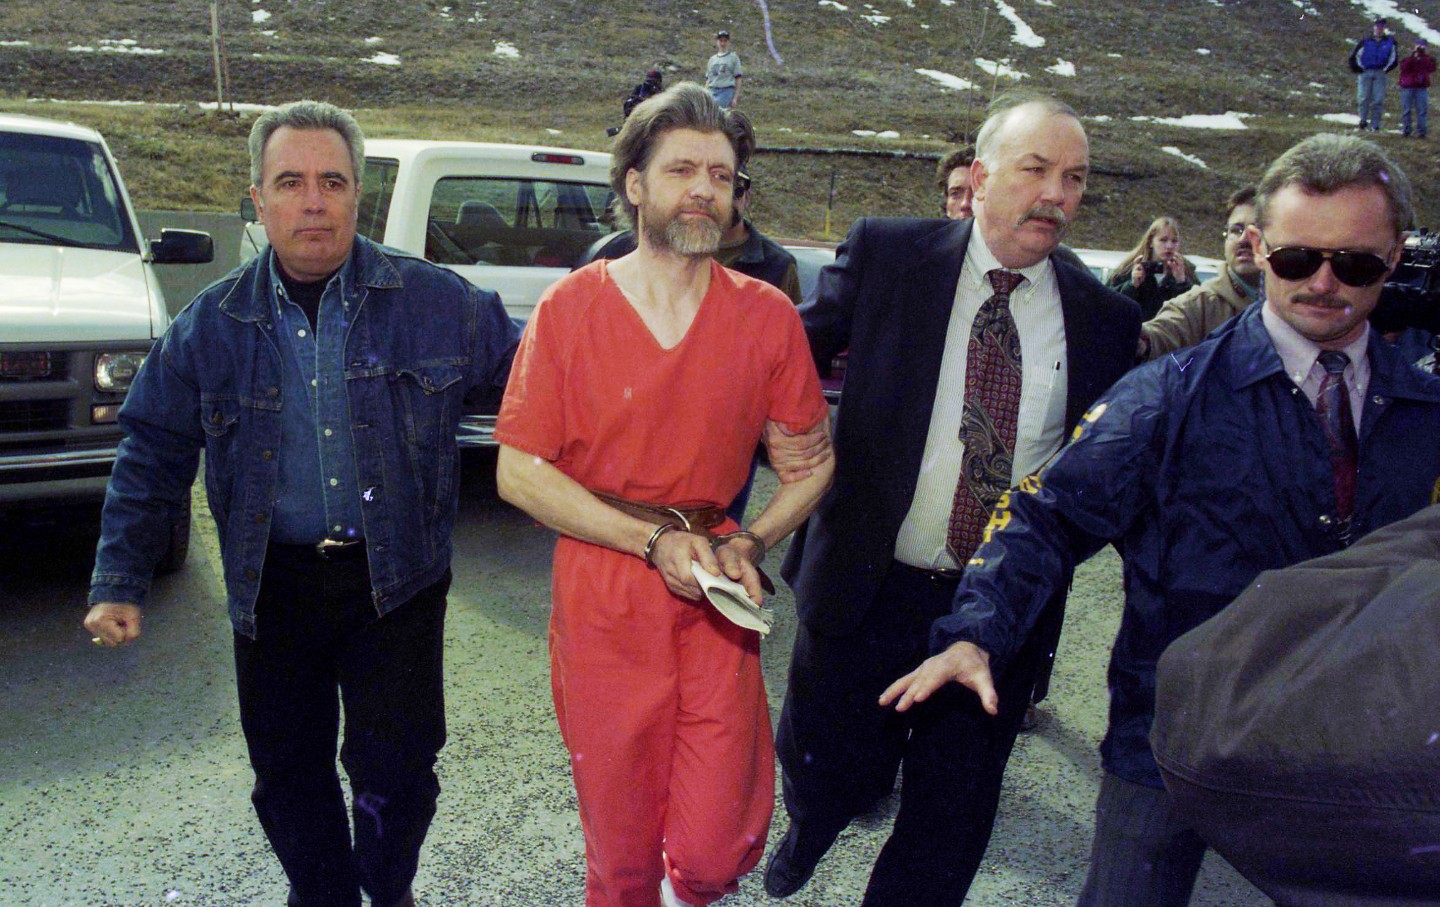 What We’re Still Getting Wrong About the Unabomber